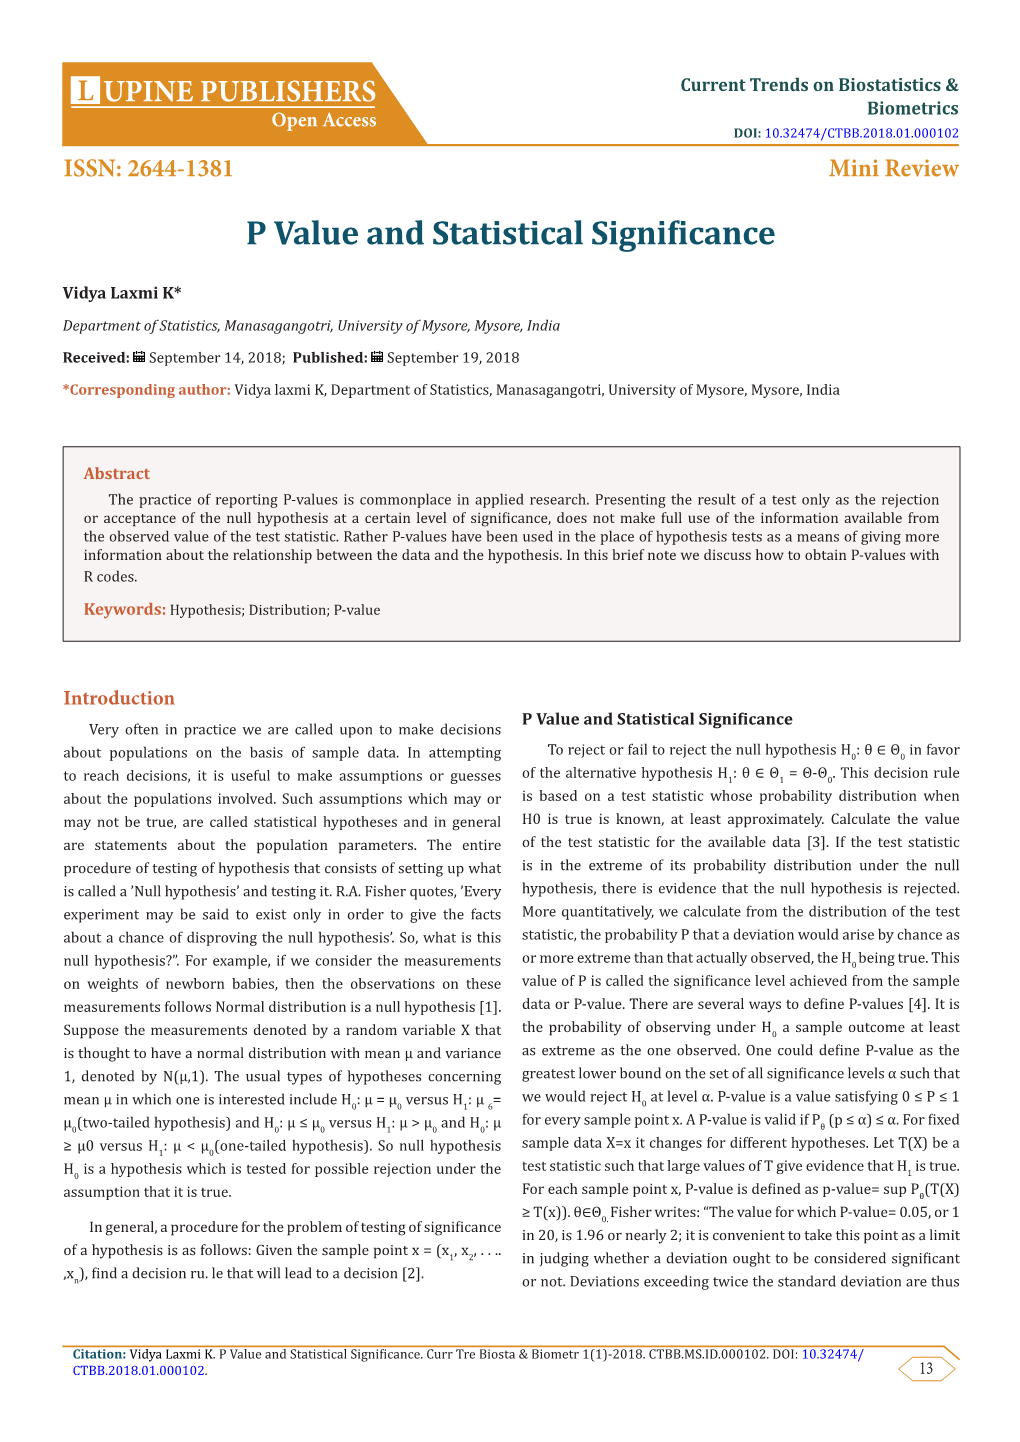 P Value and Statistical Significance